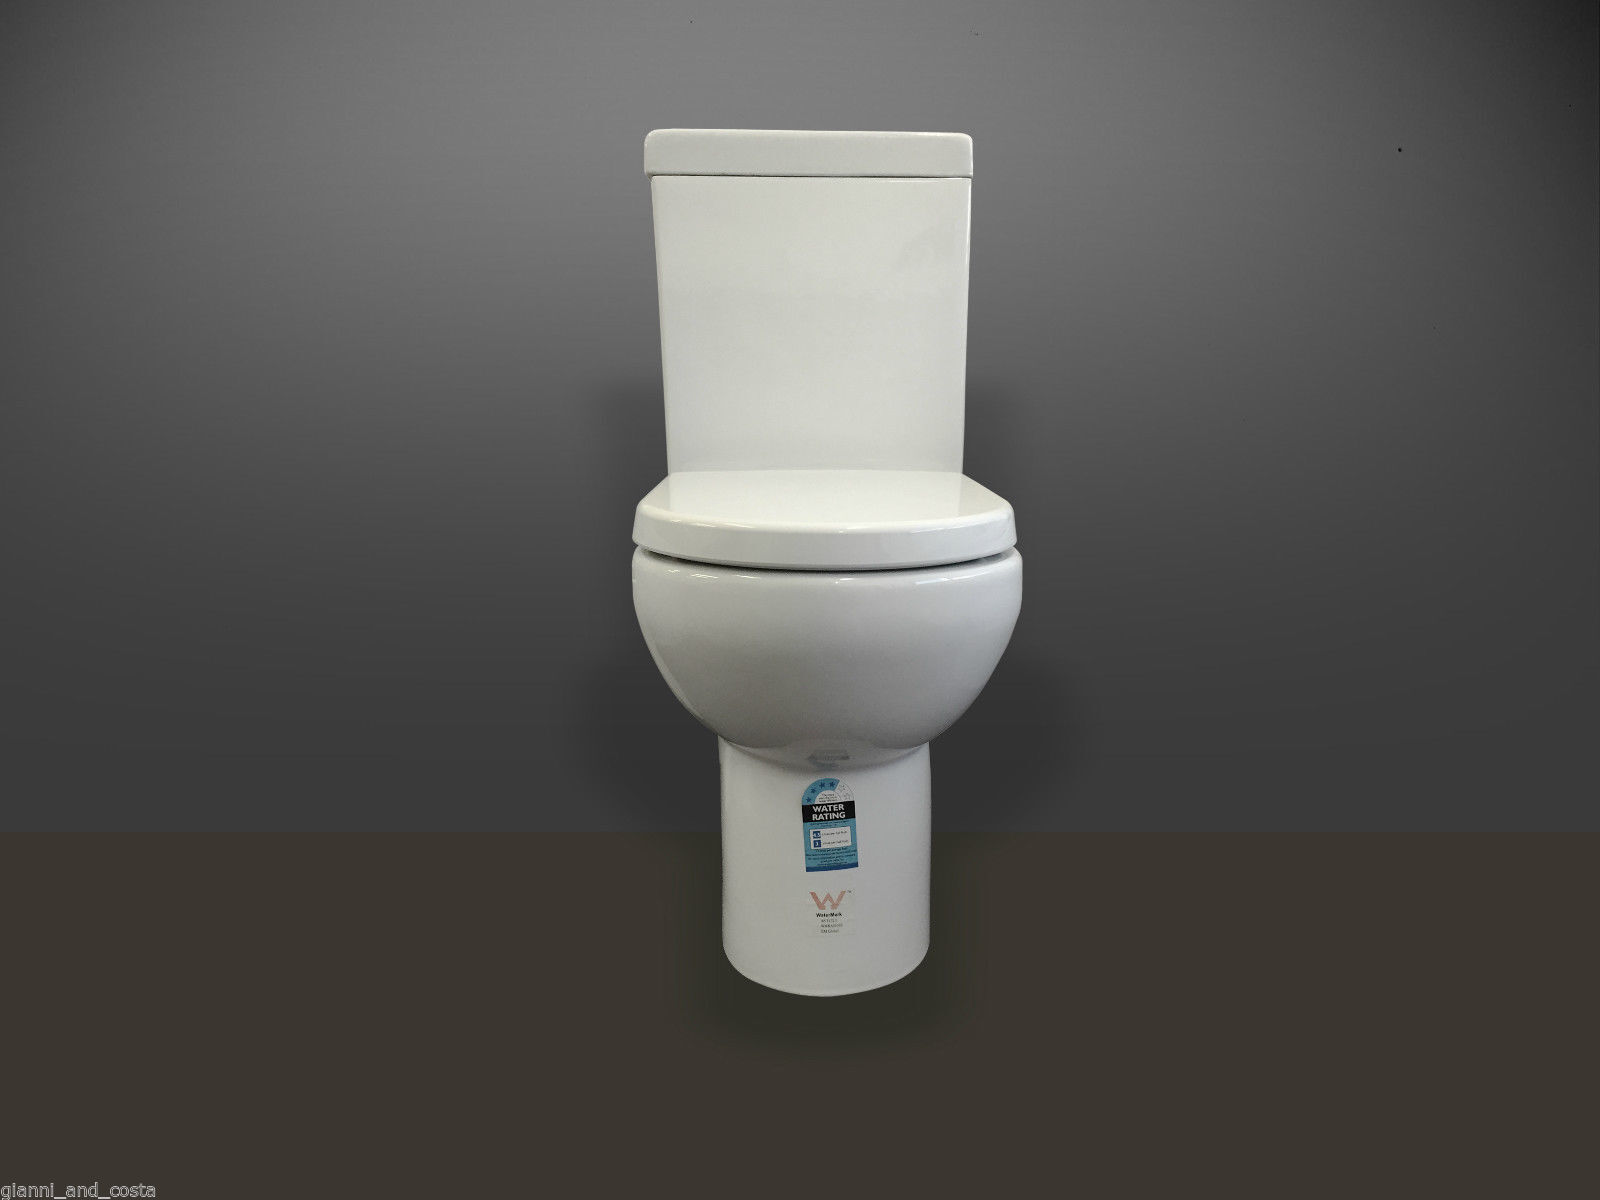 Ceramic Toilet Suite Back to Wall Model Taormina GC99 S-Trap 70-170mm